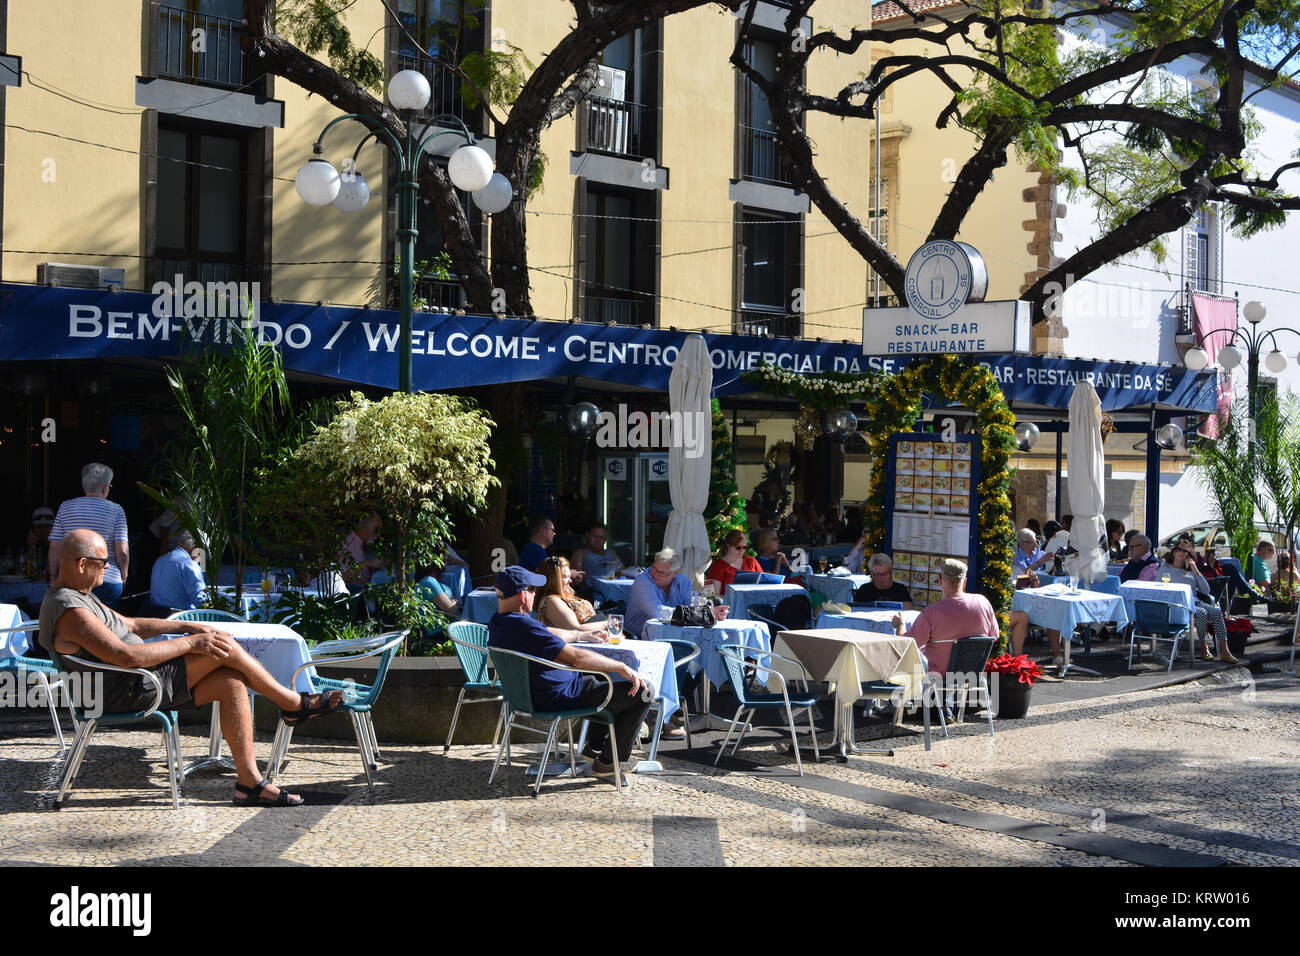 People seated at outdoor tables of the  Restaurante Centro Comercial da Sé, Funchal, Madeira, Portugal Stock Photo